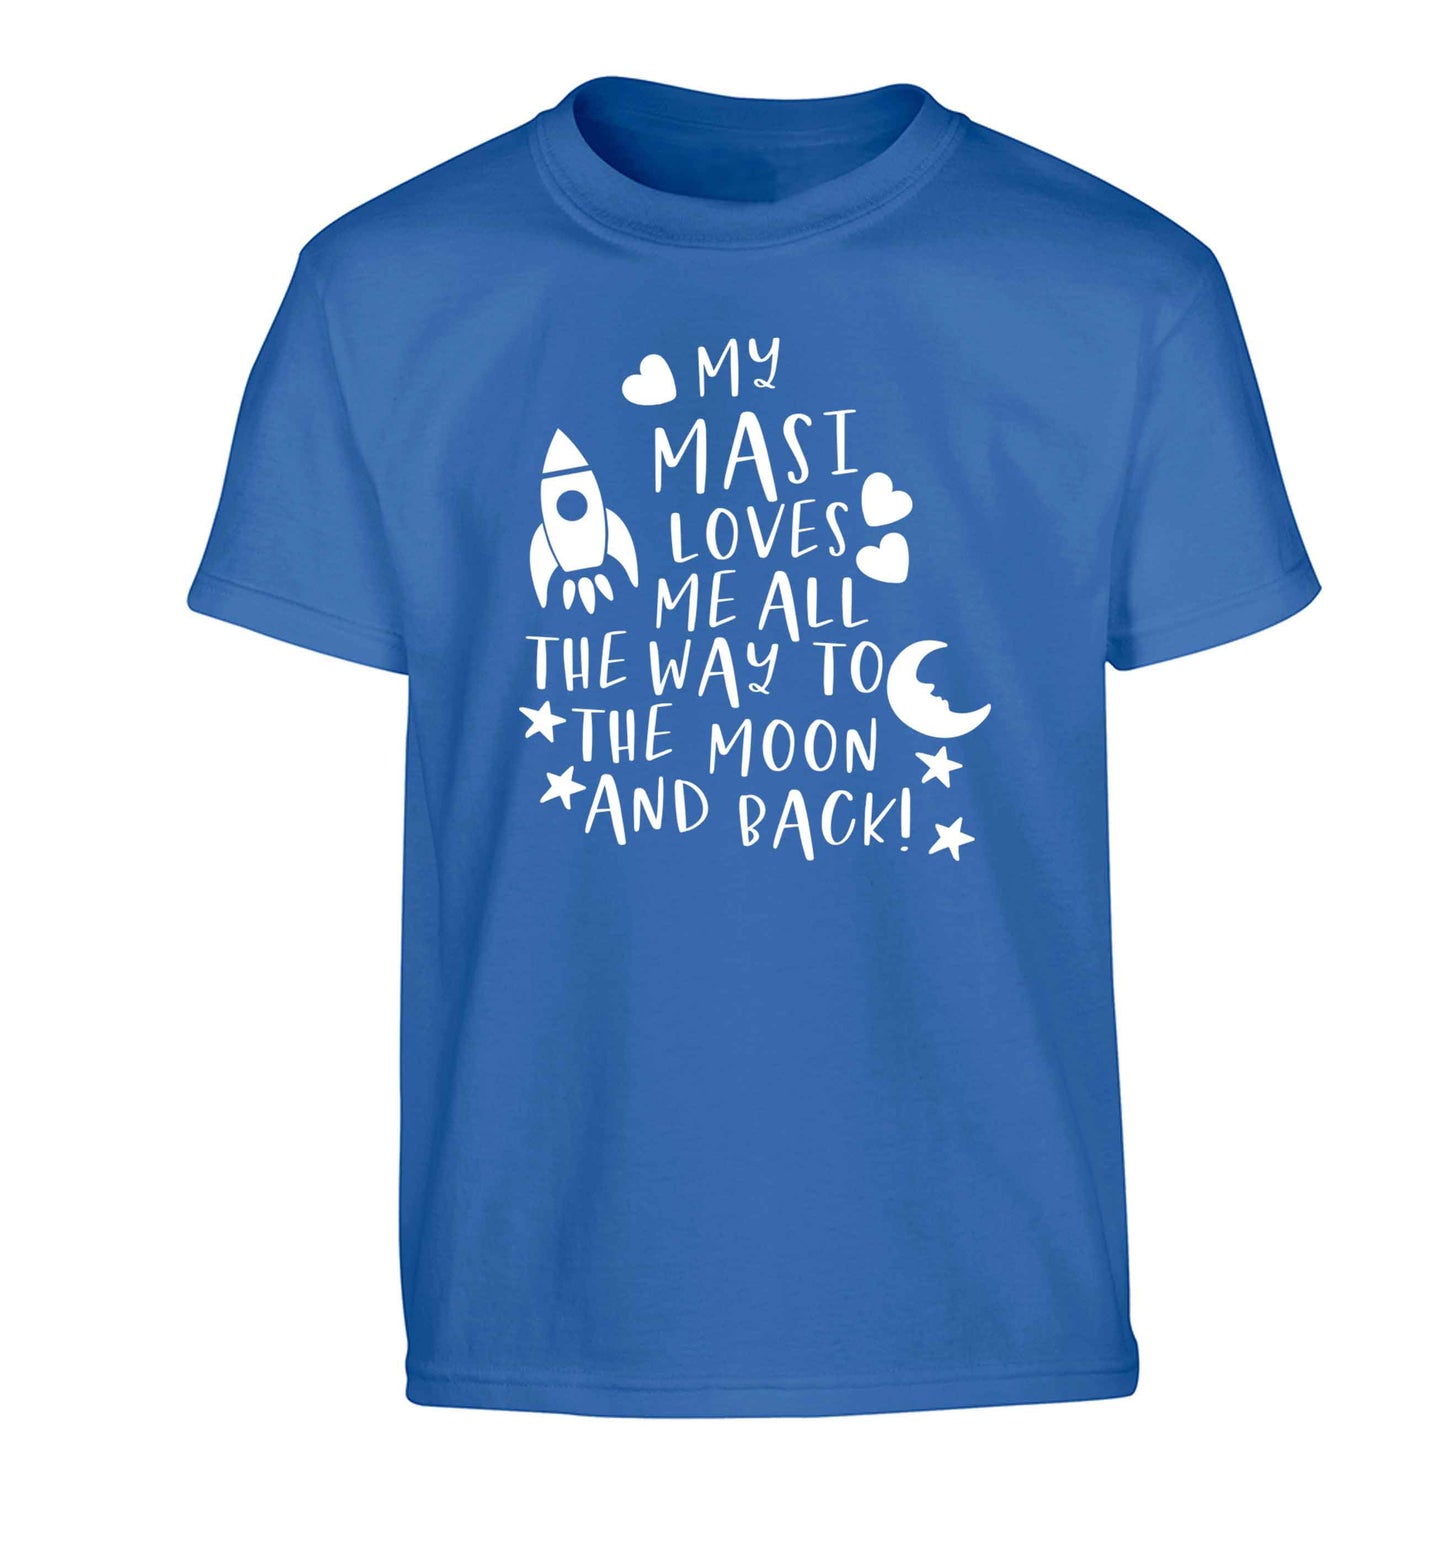 My masi loves me all the way to the moon and back Children's blue Tshirt 12-13 Years